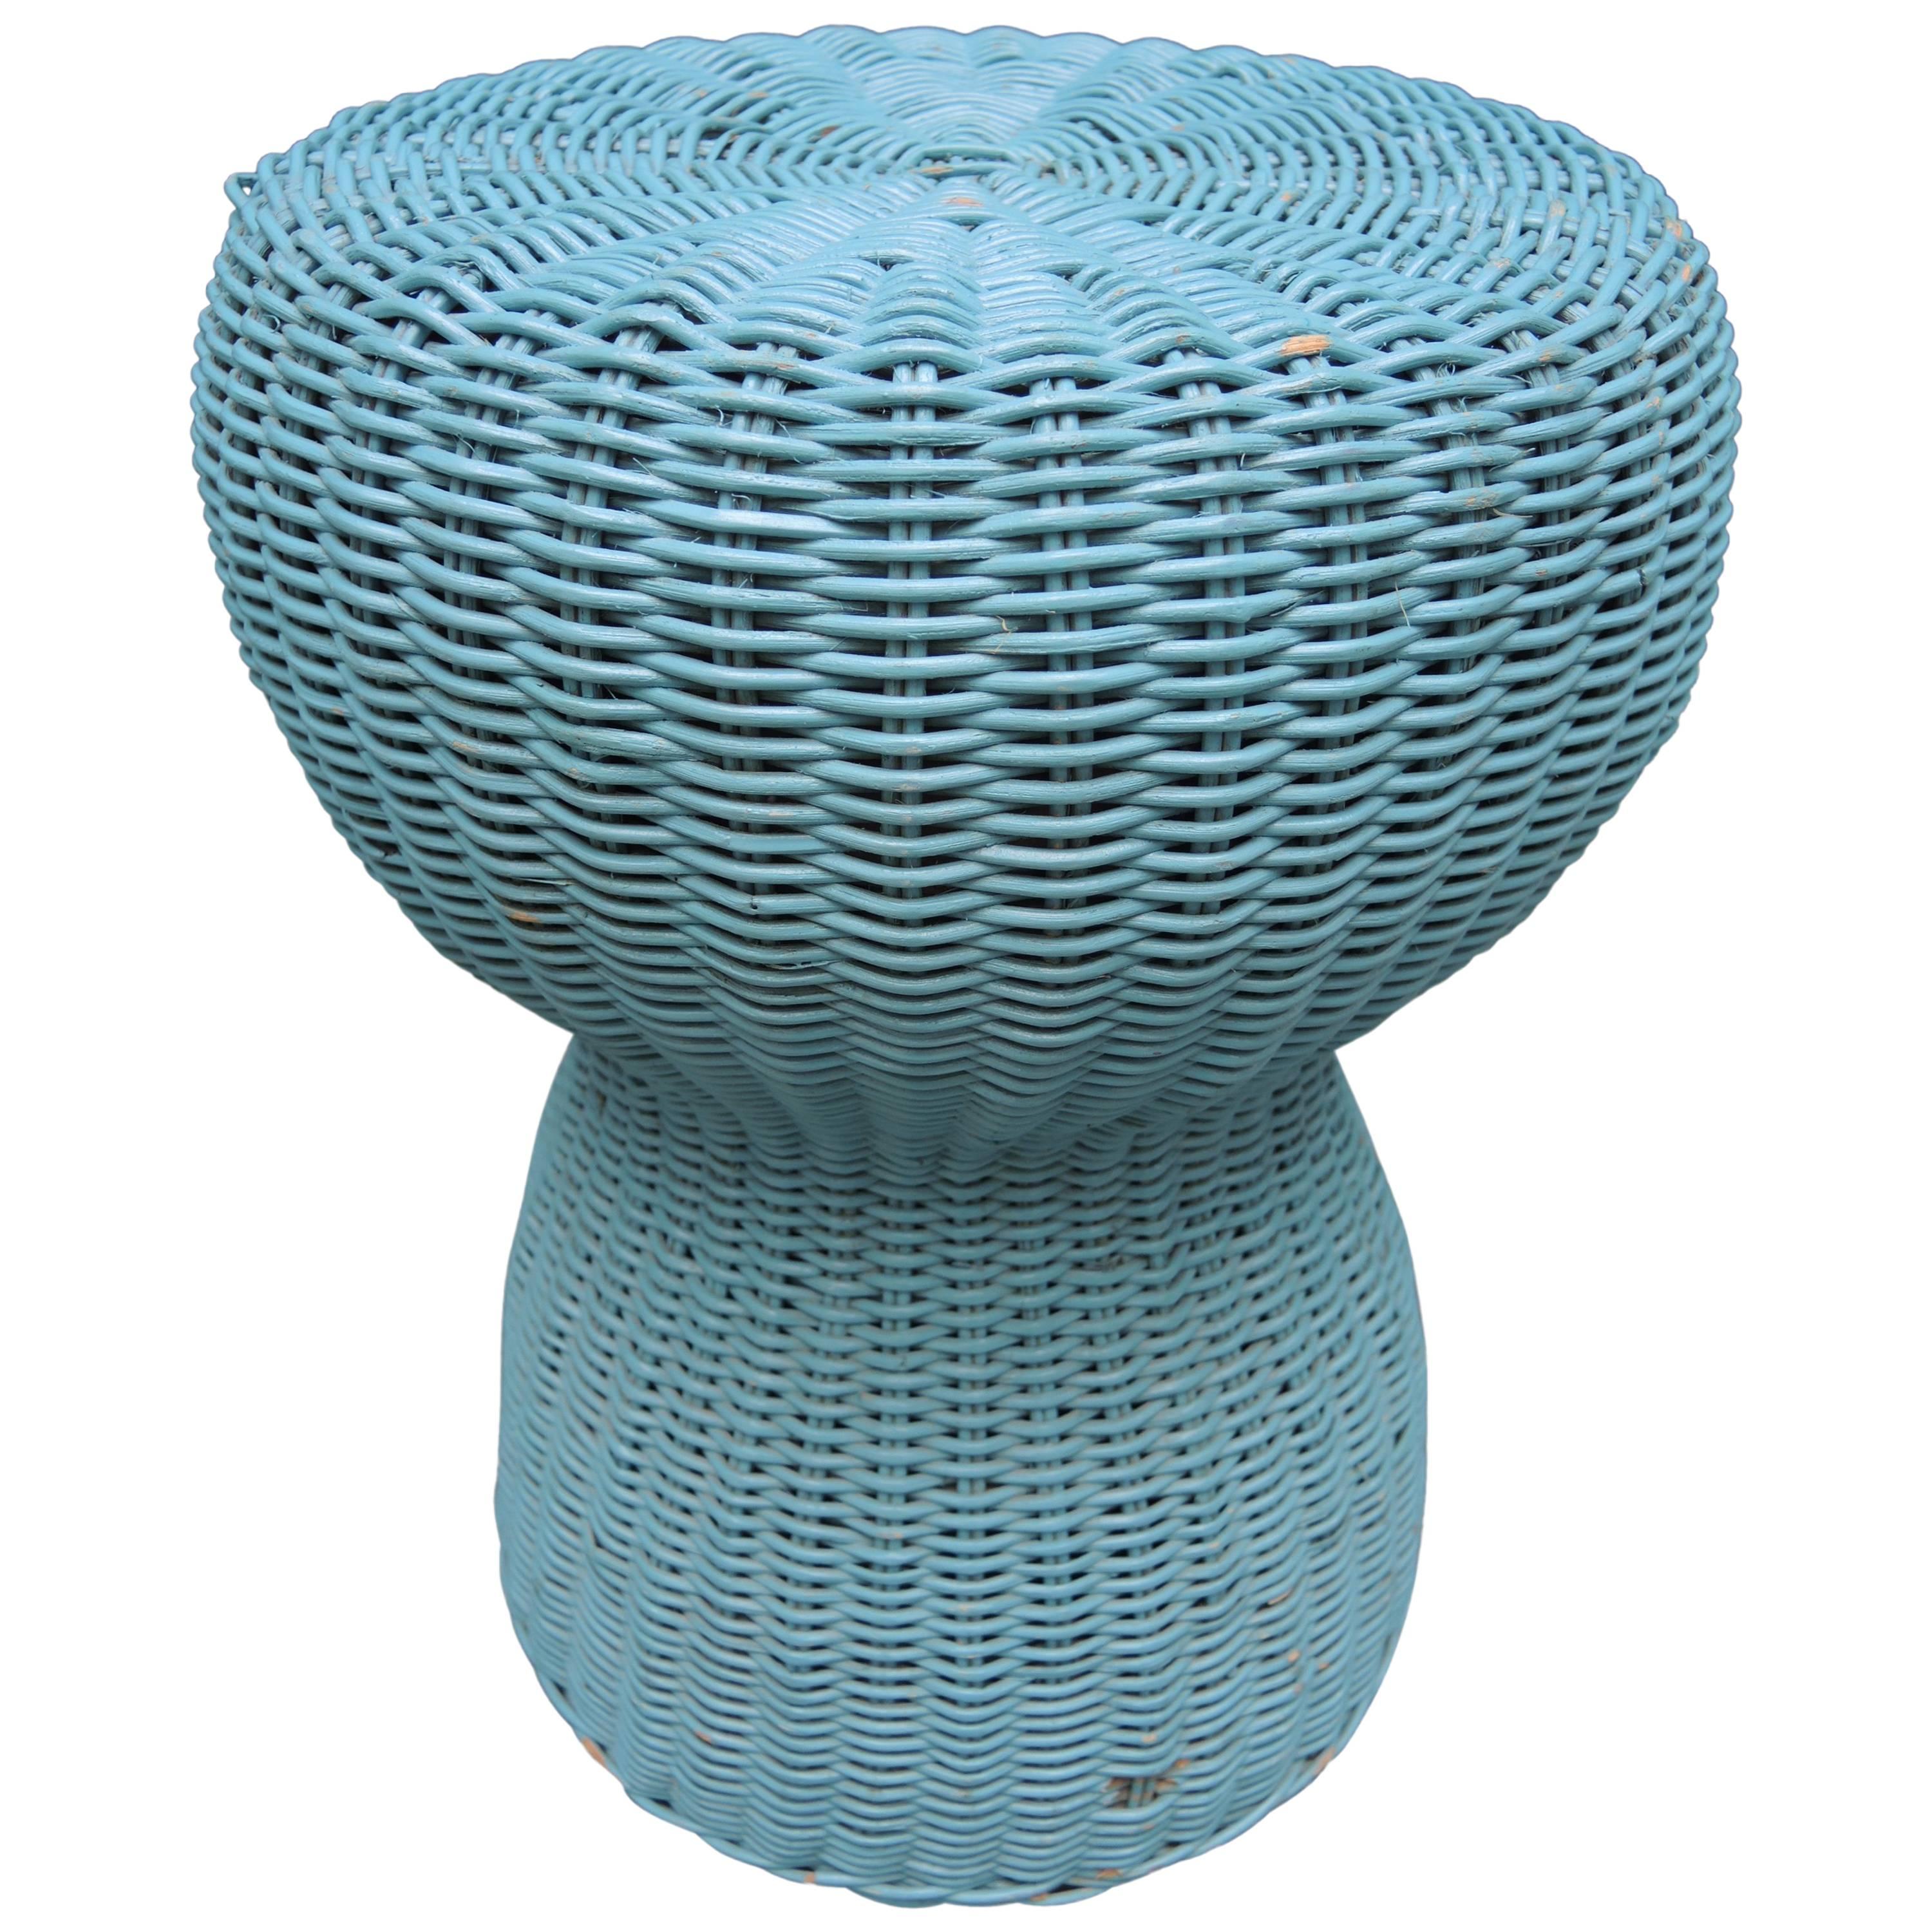 Vintage French Turquoise Blue Painted Wicker Side Table